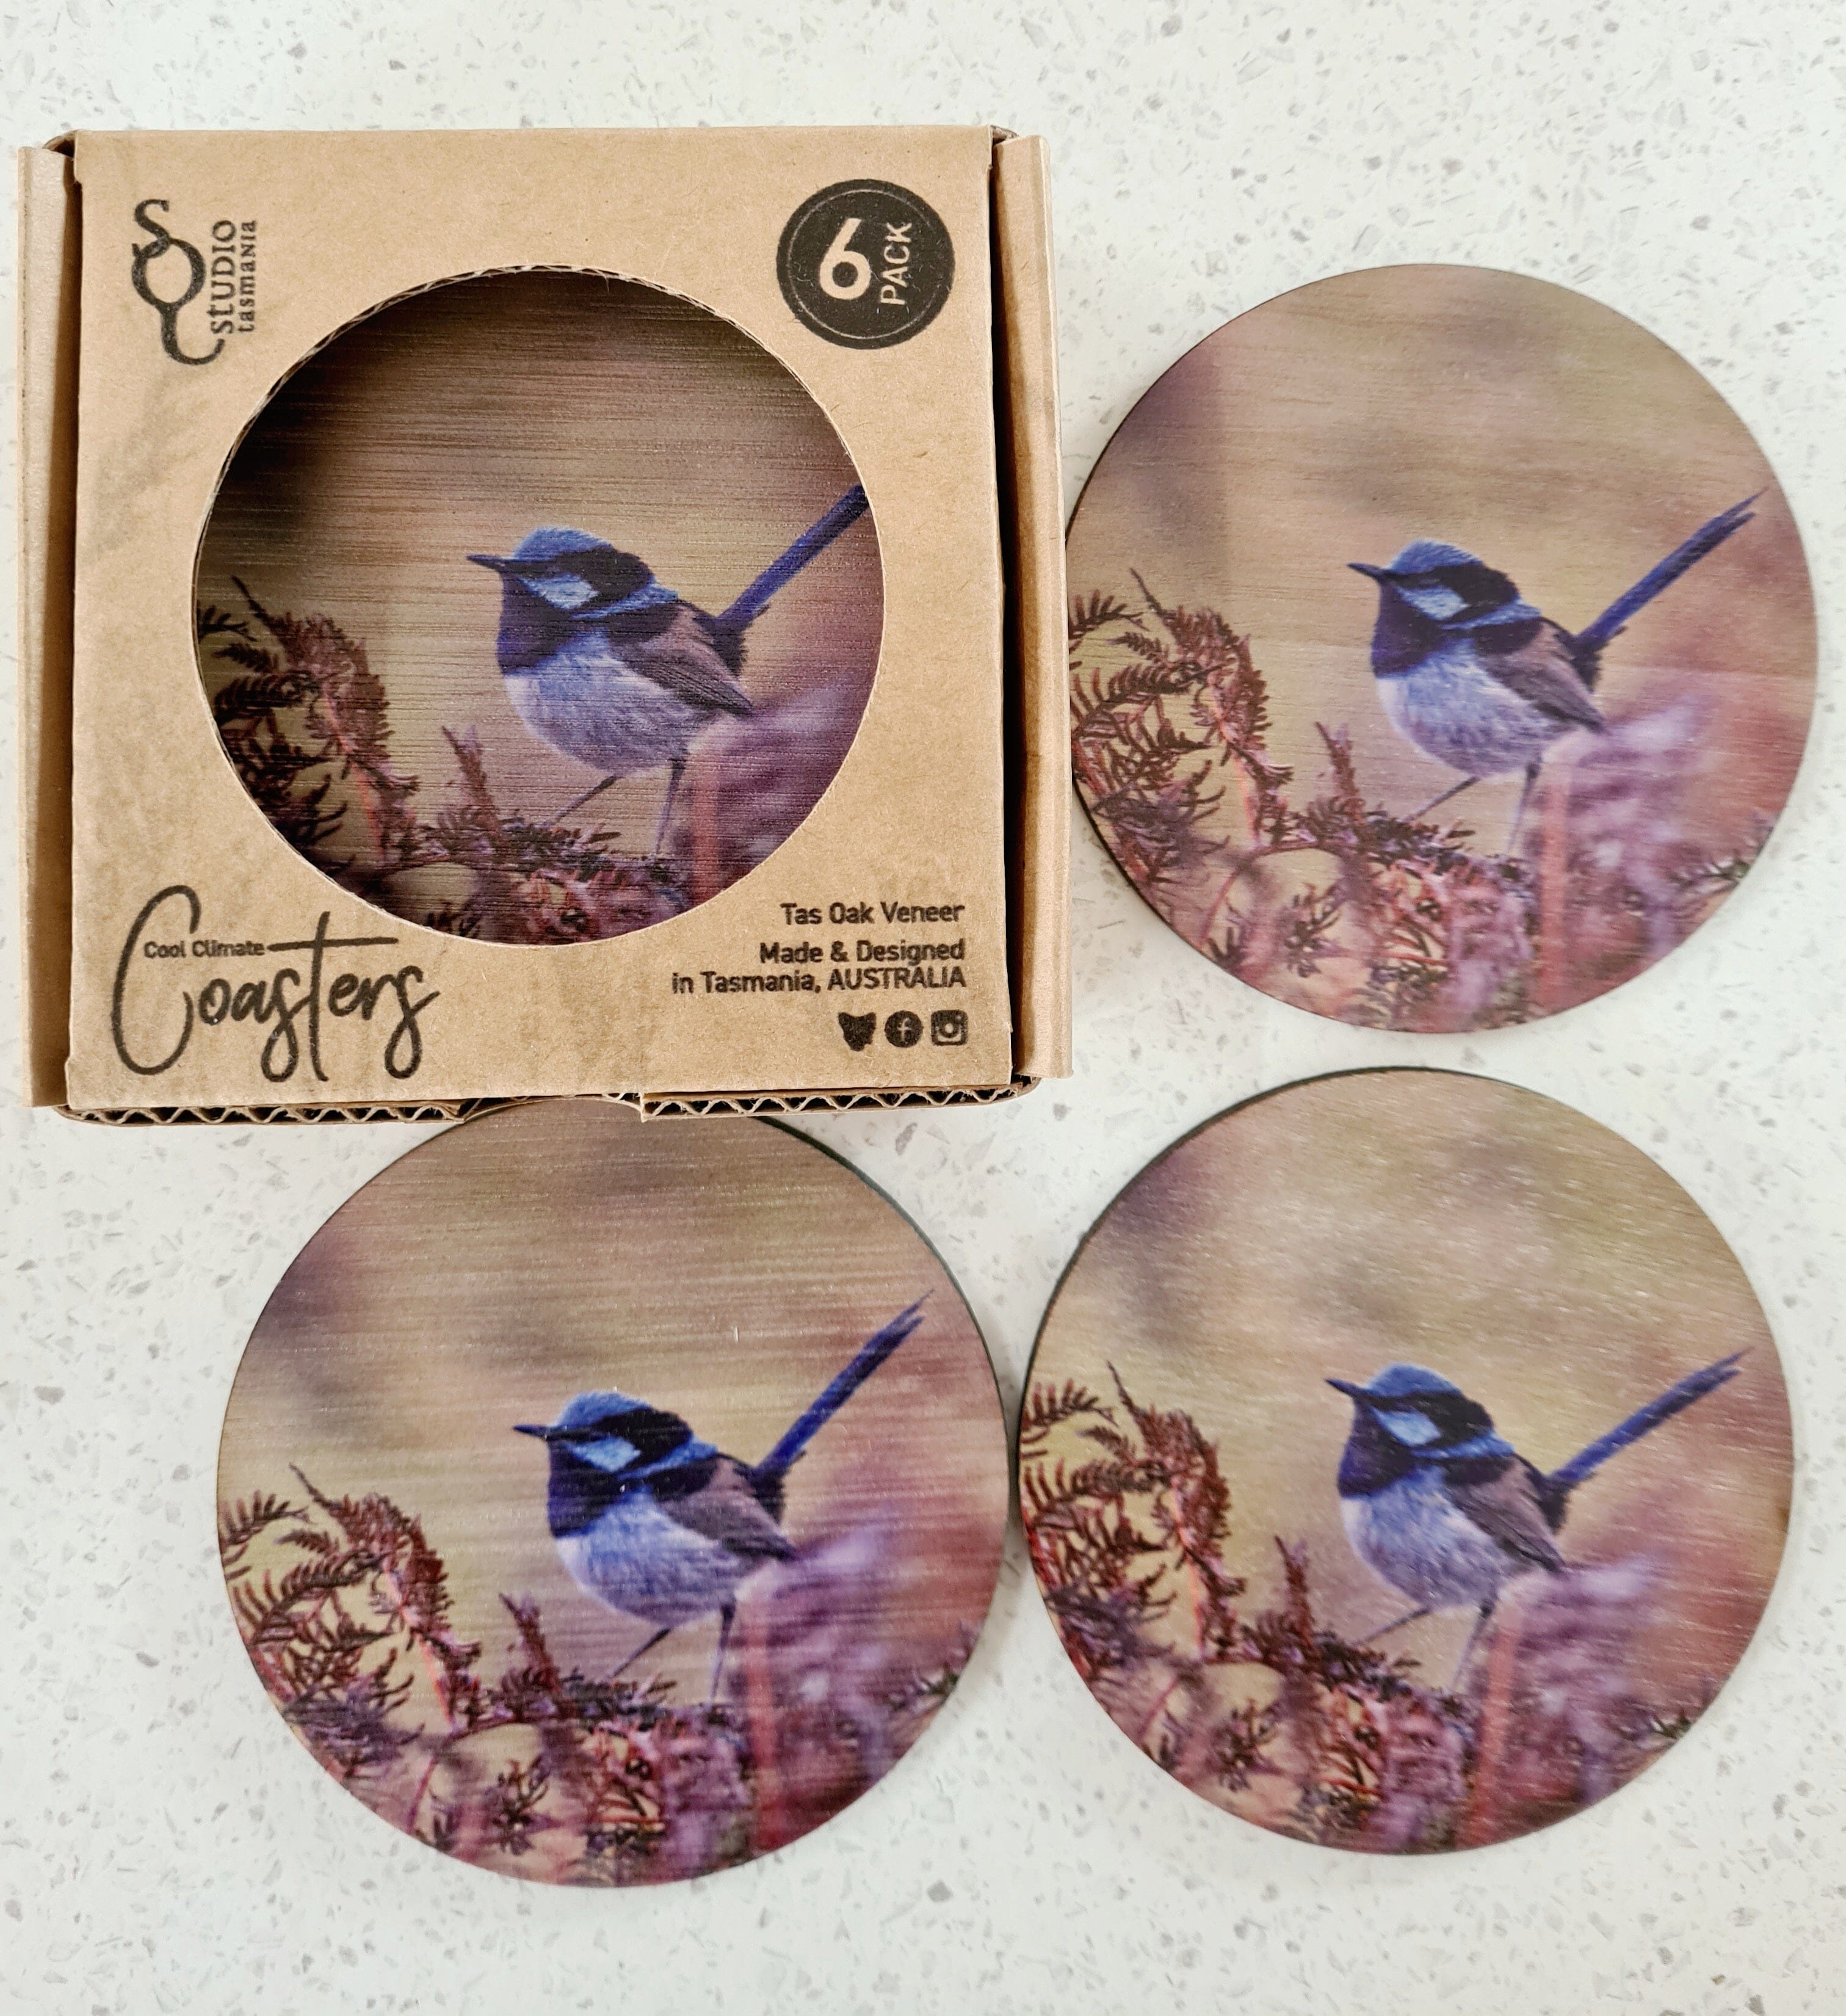 Coasters Cool Climate - The Spotted Quoll Studio tablewear The Spotted Quoll Blue Fairy Wren 